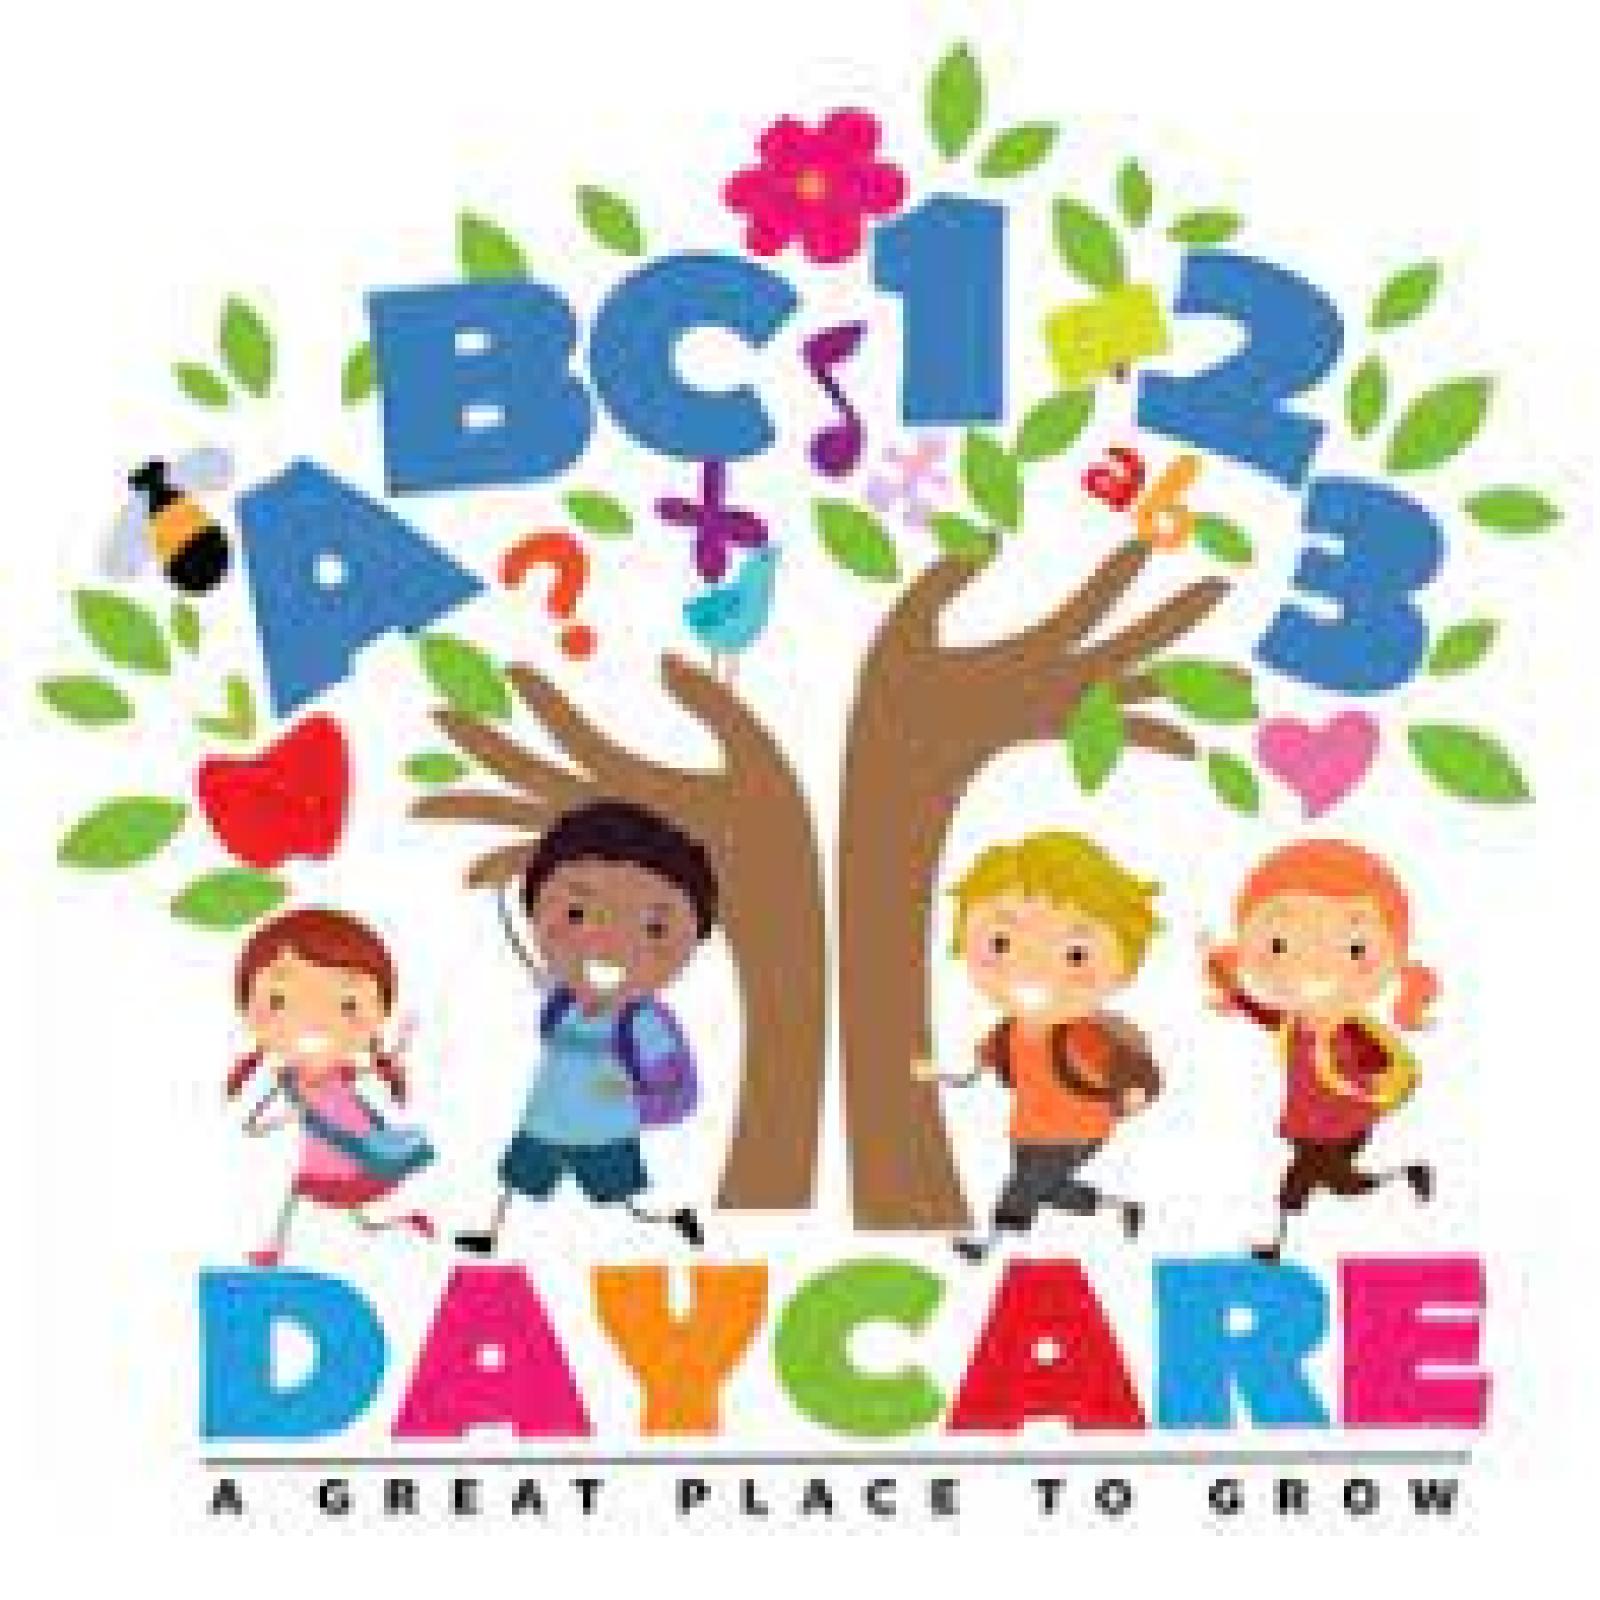 daycare pictures clip art